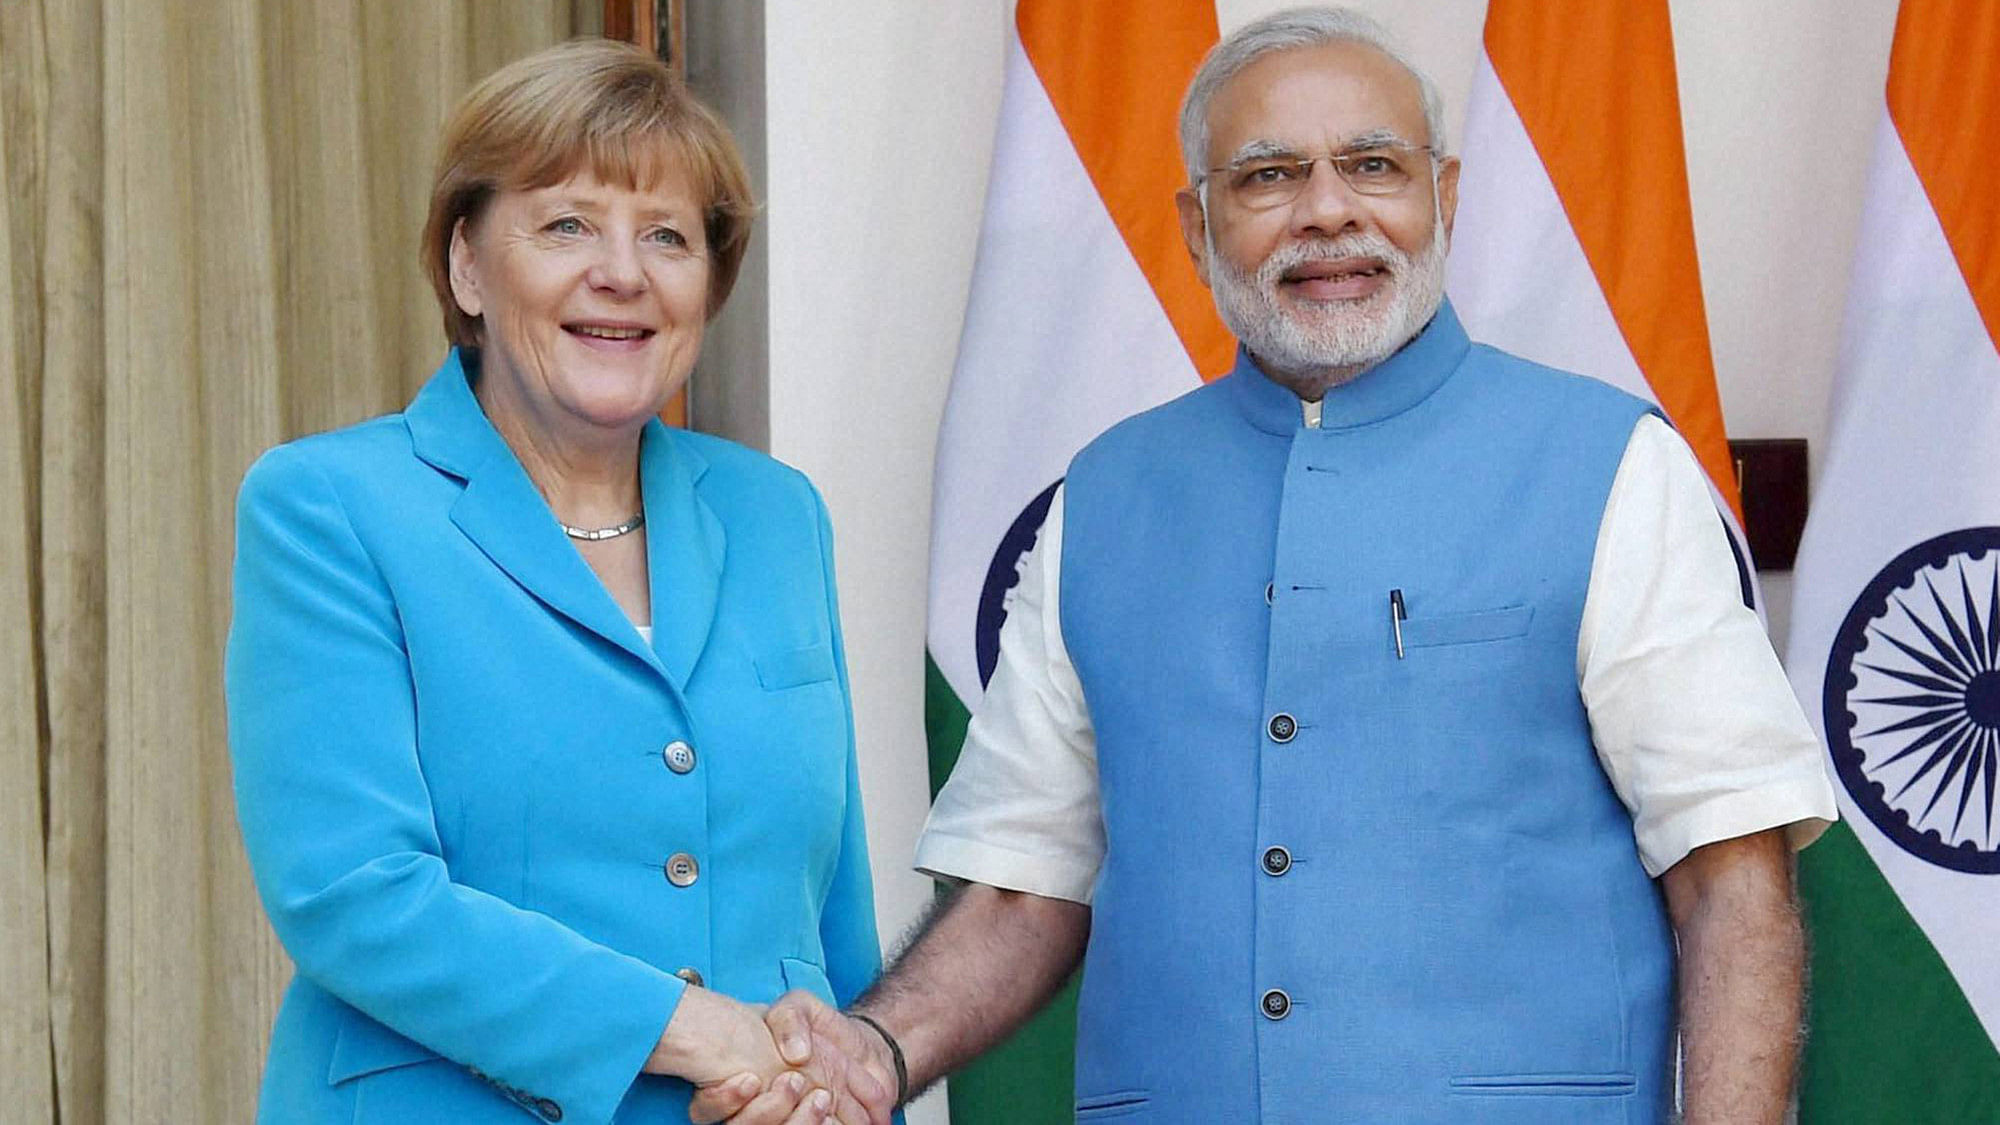 Prime Minister Narendra Modi (right) with German Chancellor Angela Merkel (left) at Hyderabad House in New Delhi on Monday. (Photo: PTI)